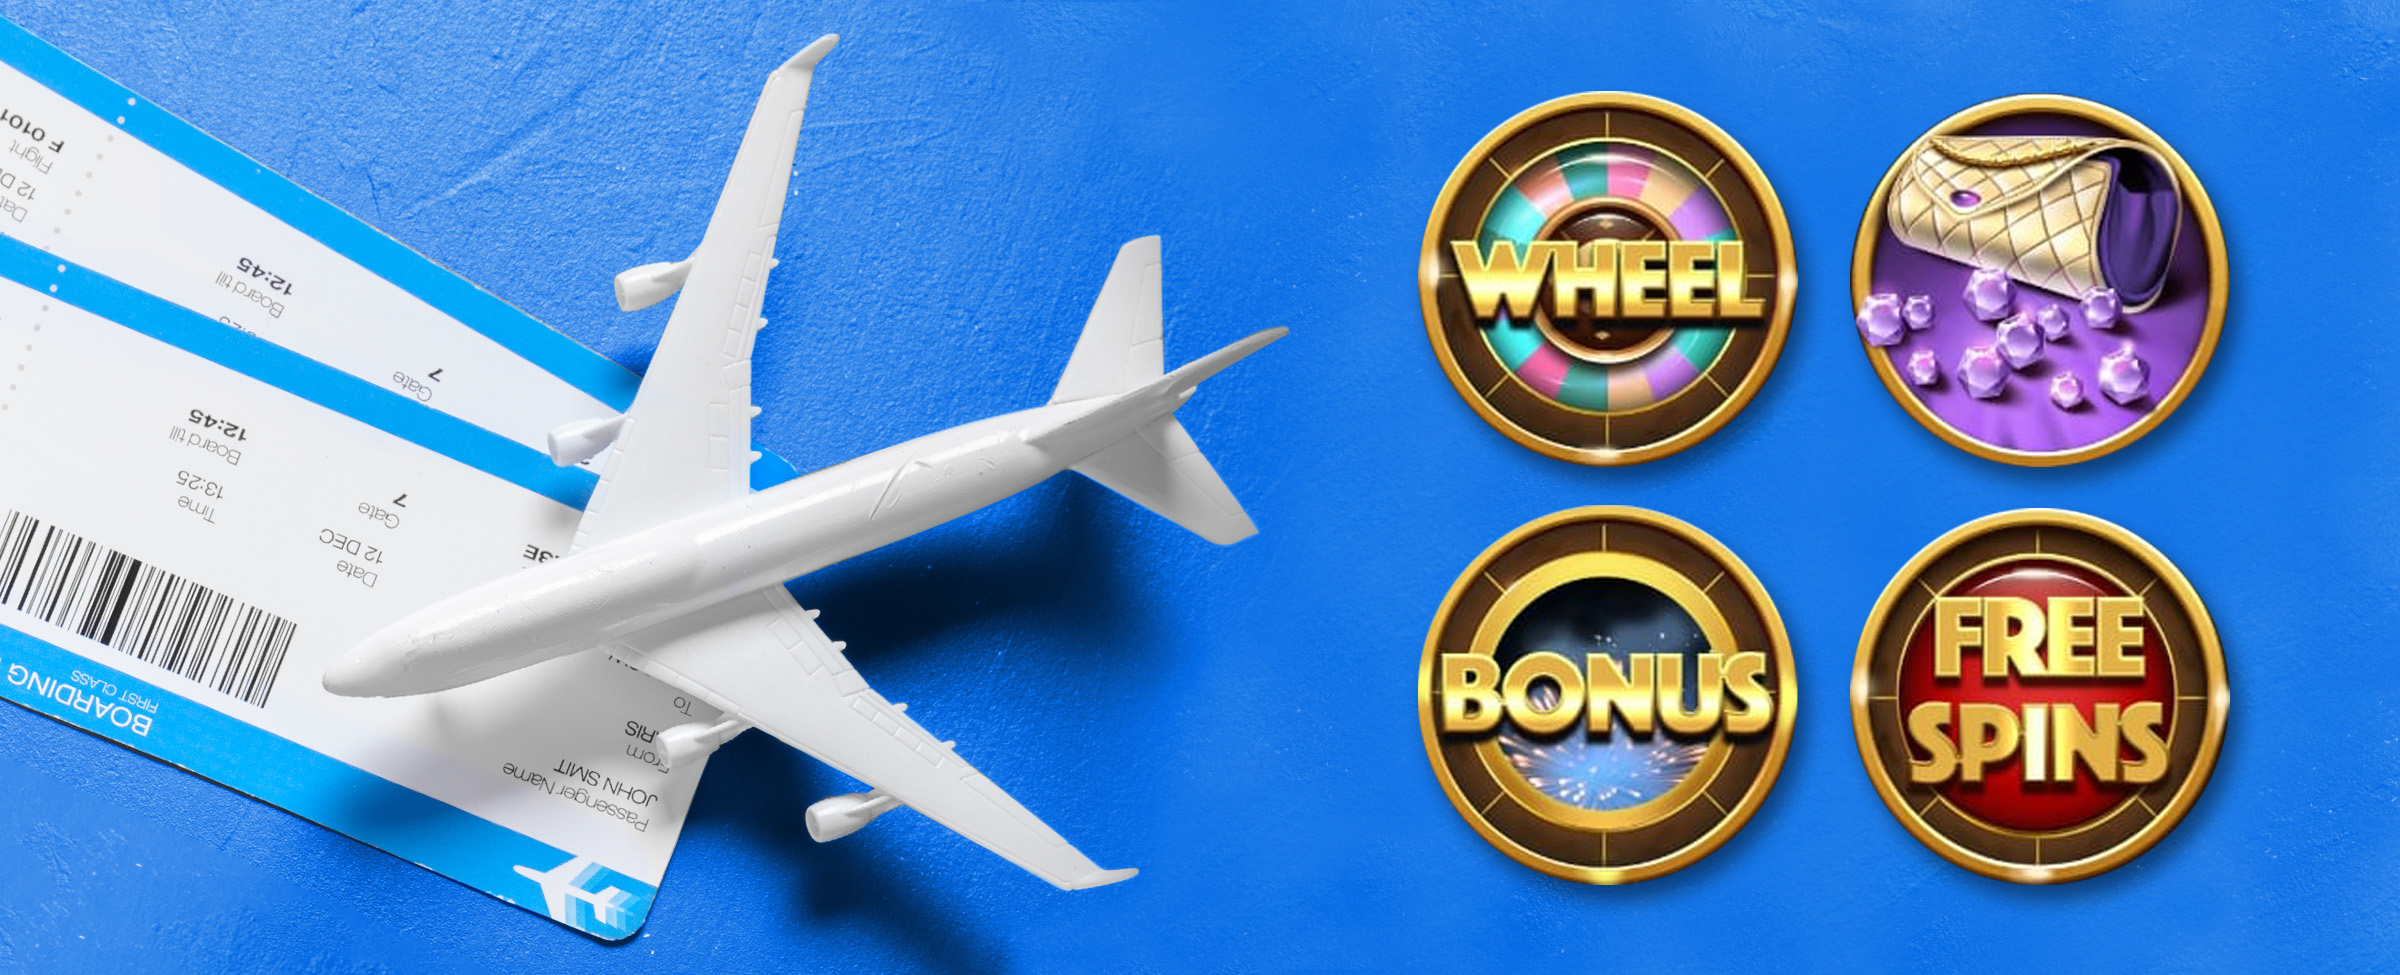 A small white plastic toy airplane rests on two flight tickets on a blue table surface, while four illustrated icons are featured - one showing a handbag with purple jewels, the other three featuring words including “wheel”, “bonus”, and “free spins”.